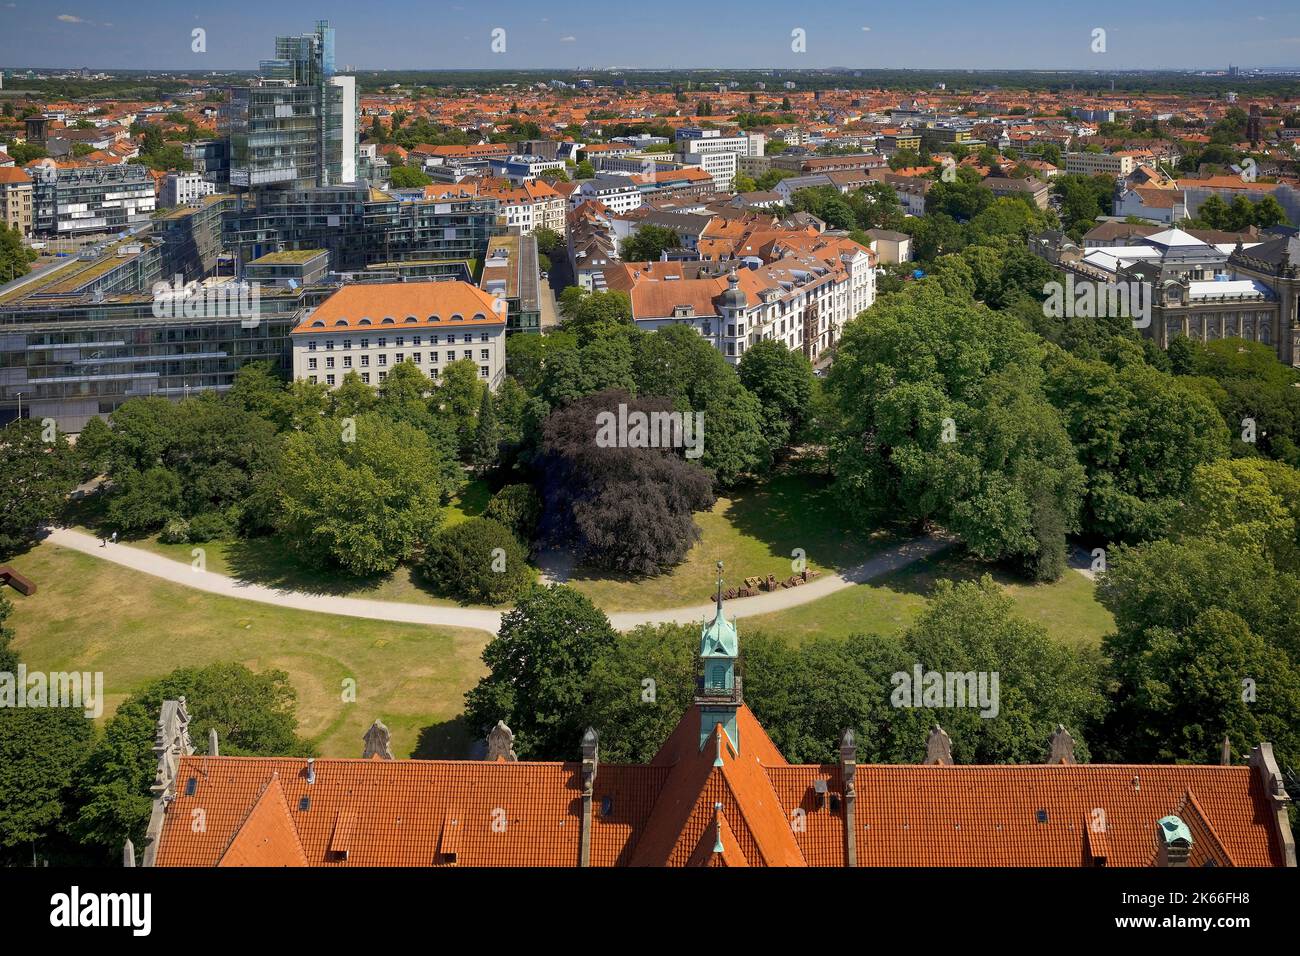 view of the administrative building of the Norddeutsche Landesbank from the town hall tower, Germany, Lower Saxony, Hanover Stock Photo